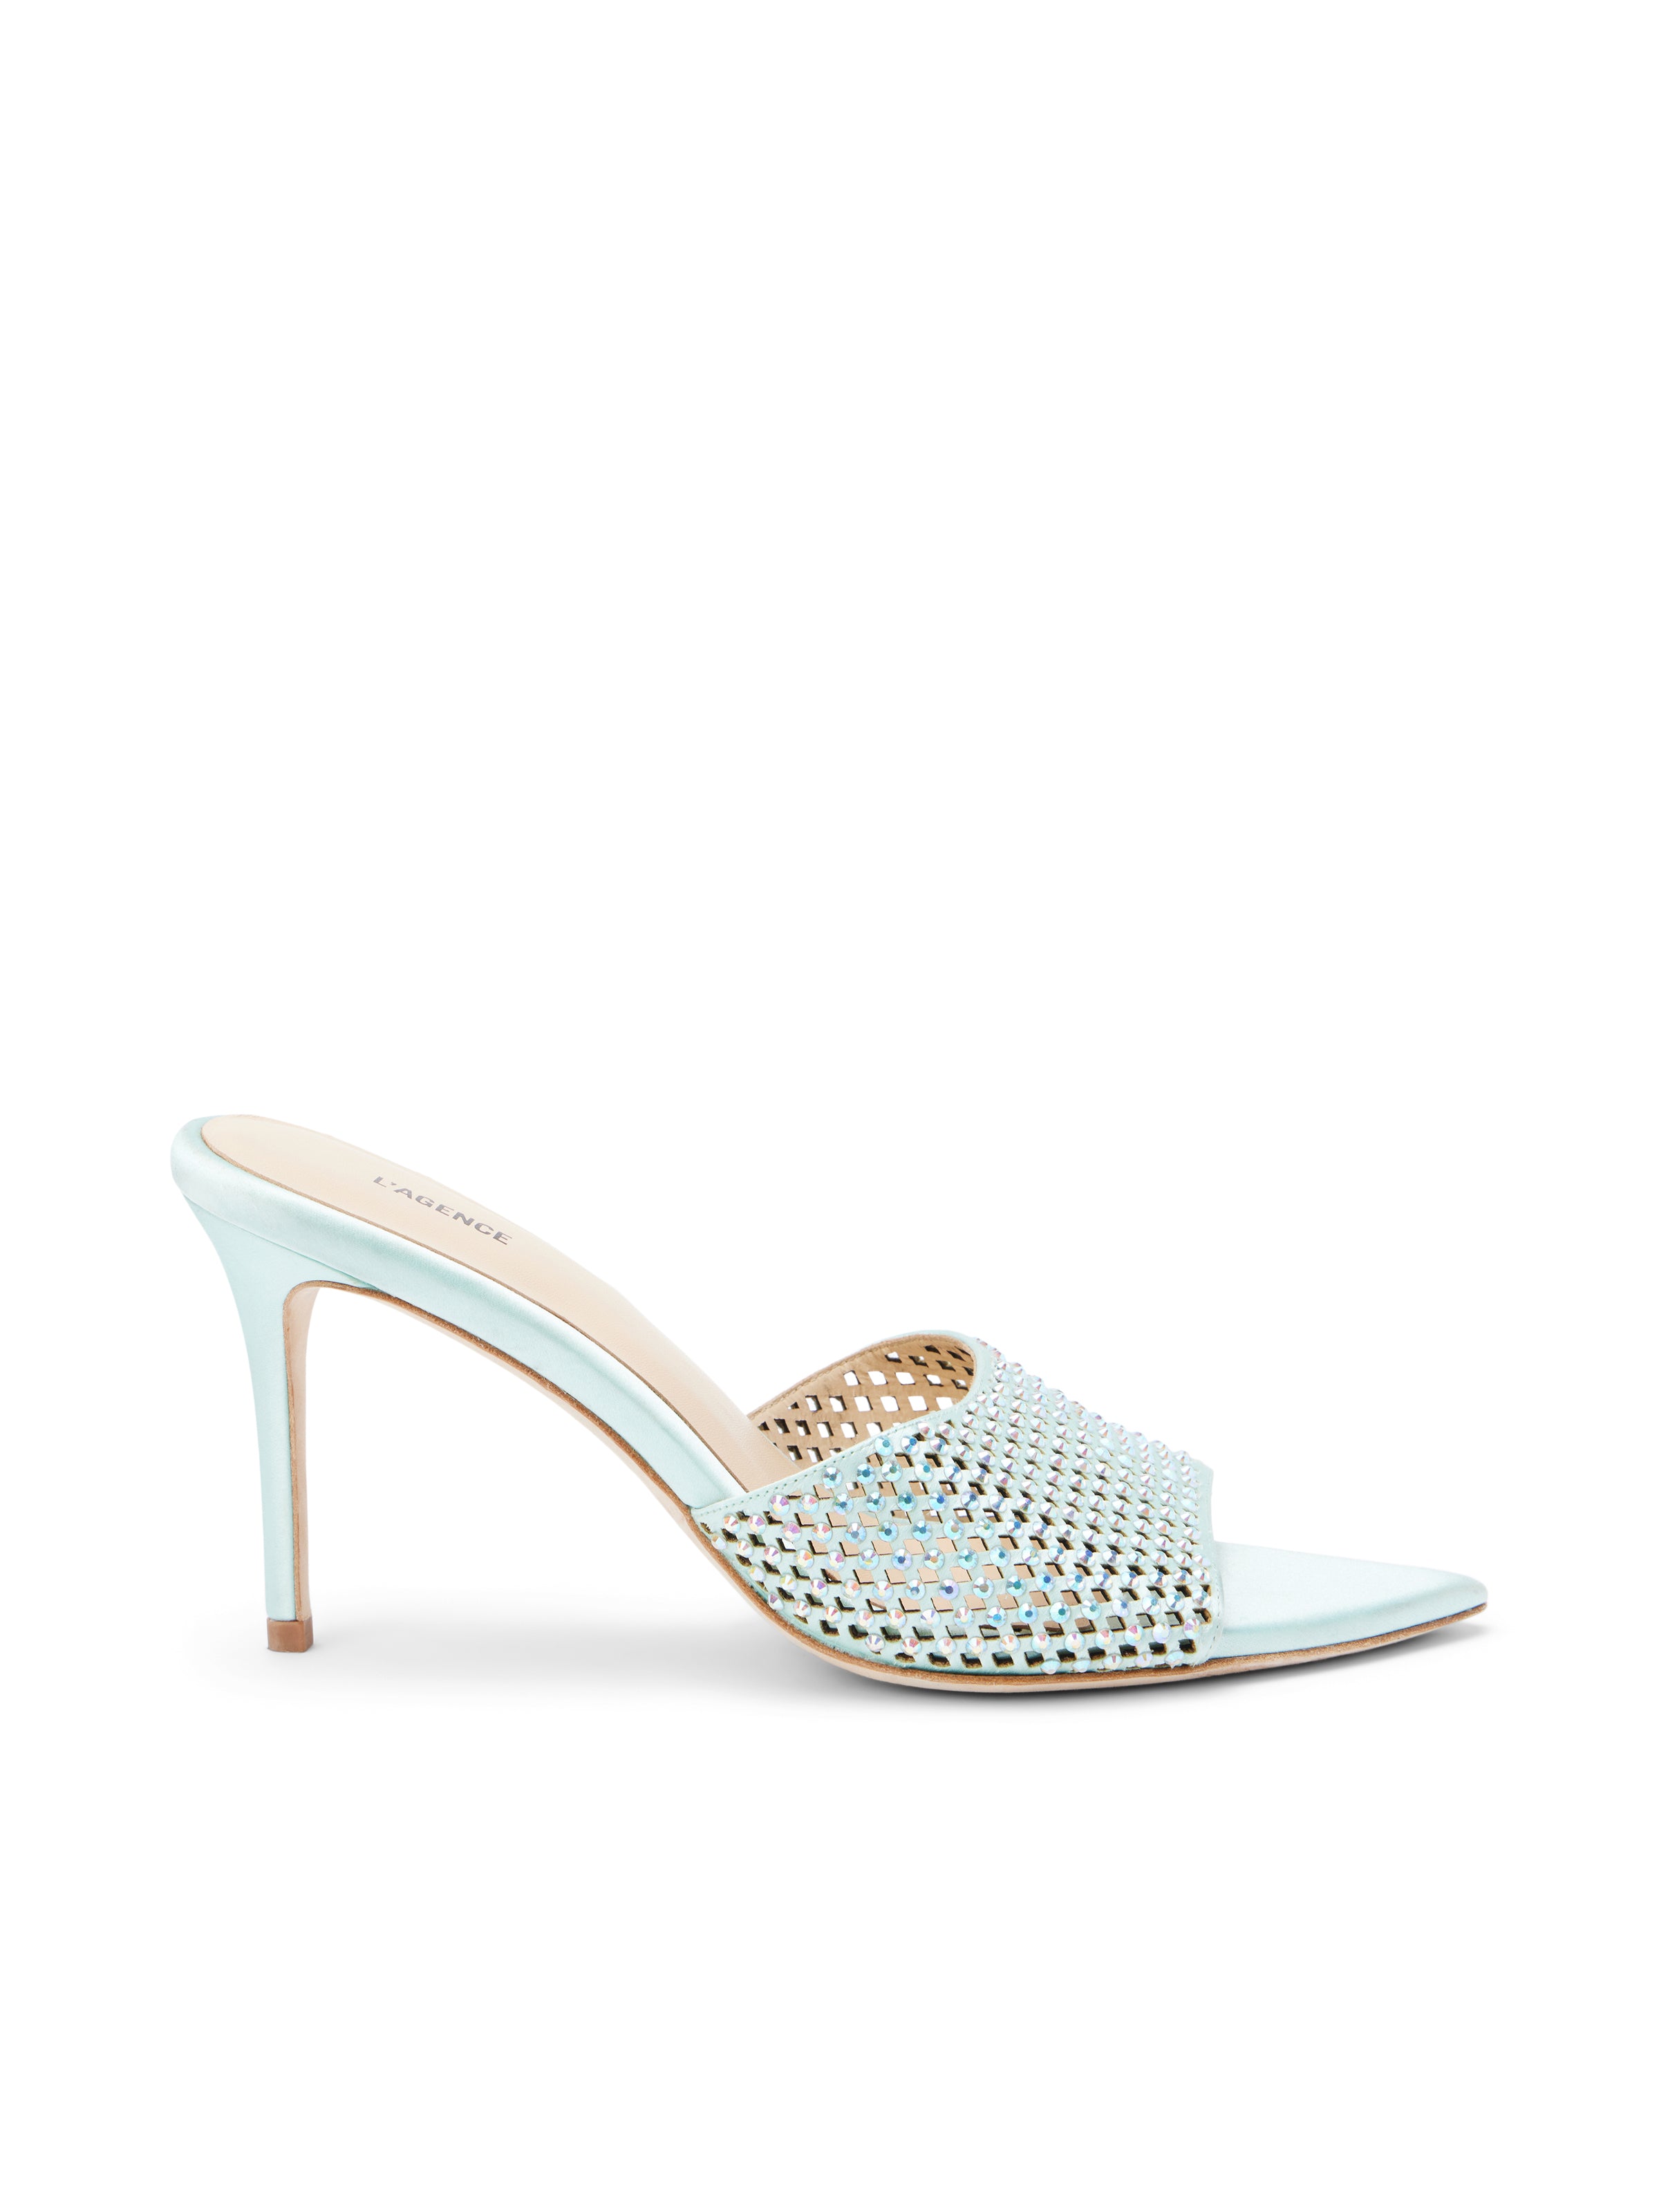 L'AGENCE Narcise Open Toe Mule in Mint Satin